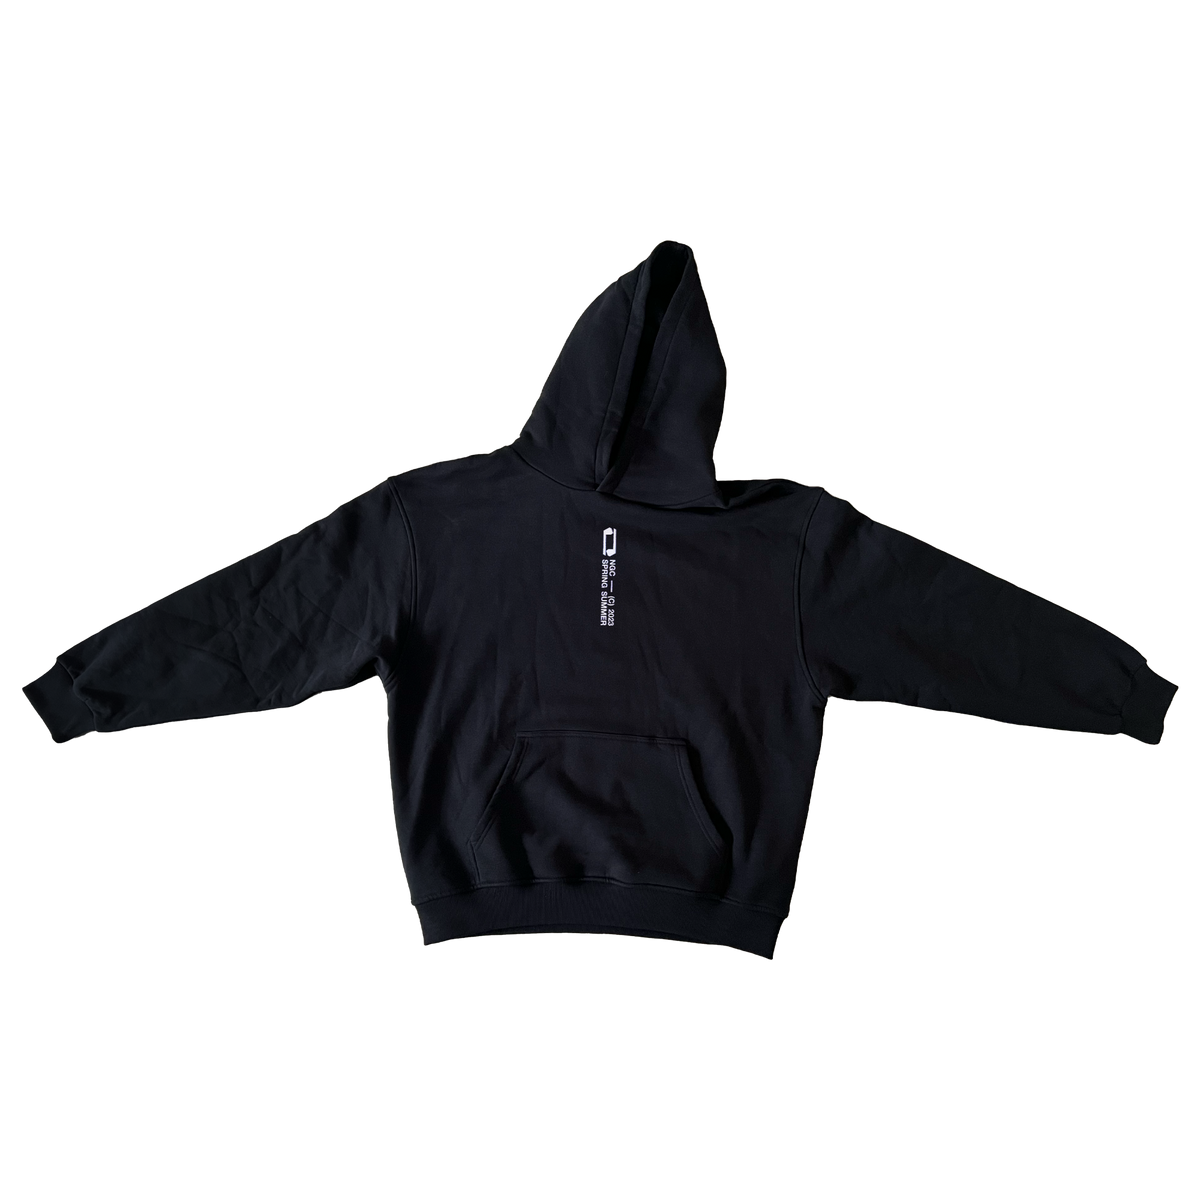 "ABSTRACT" HOODIE